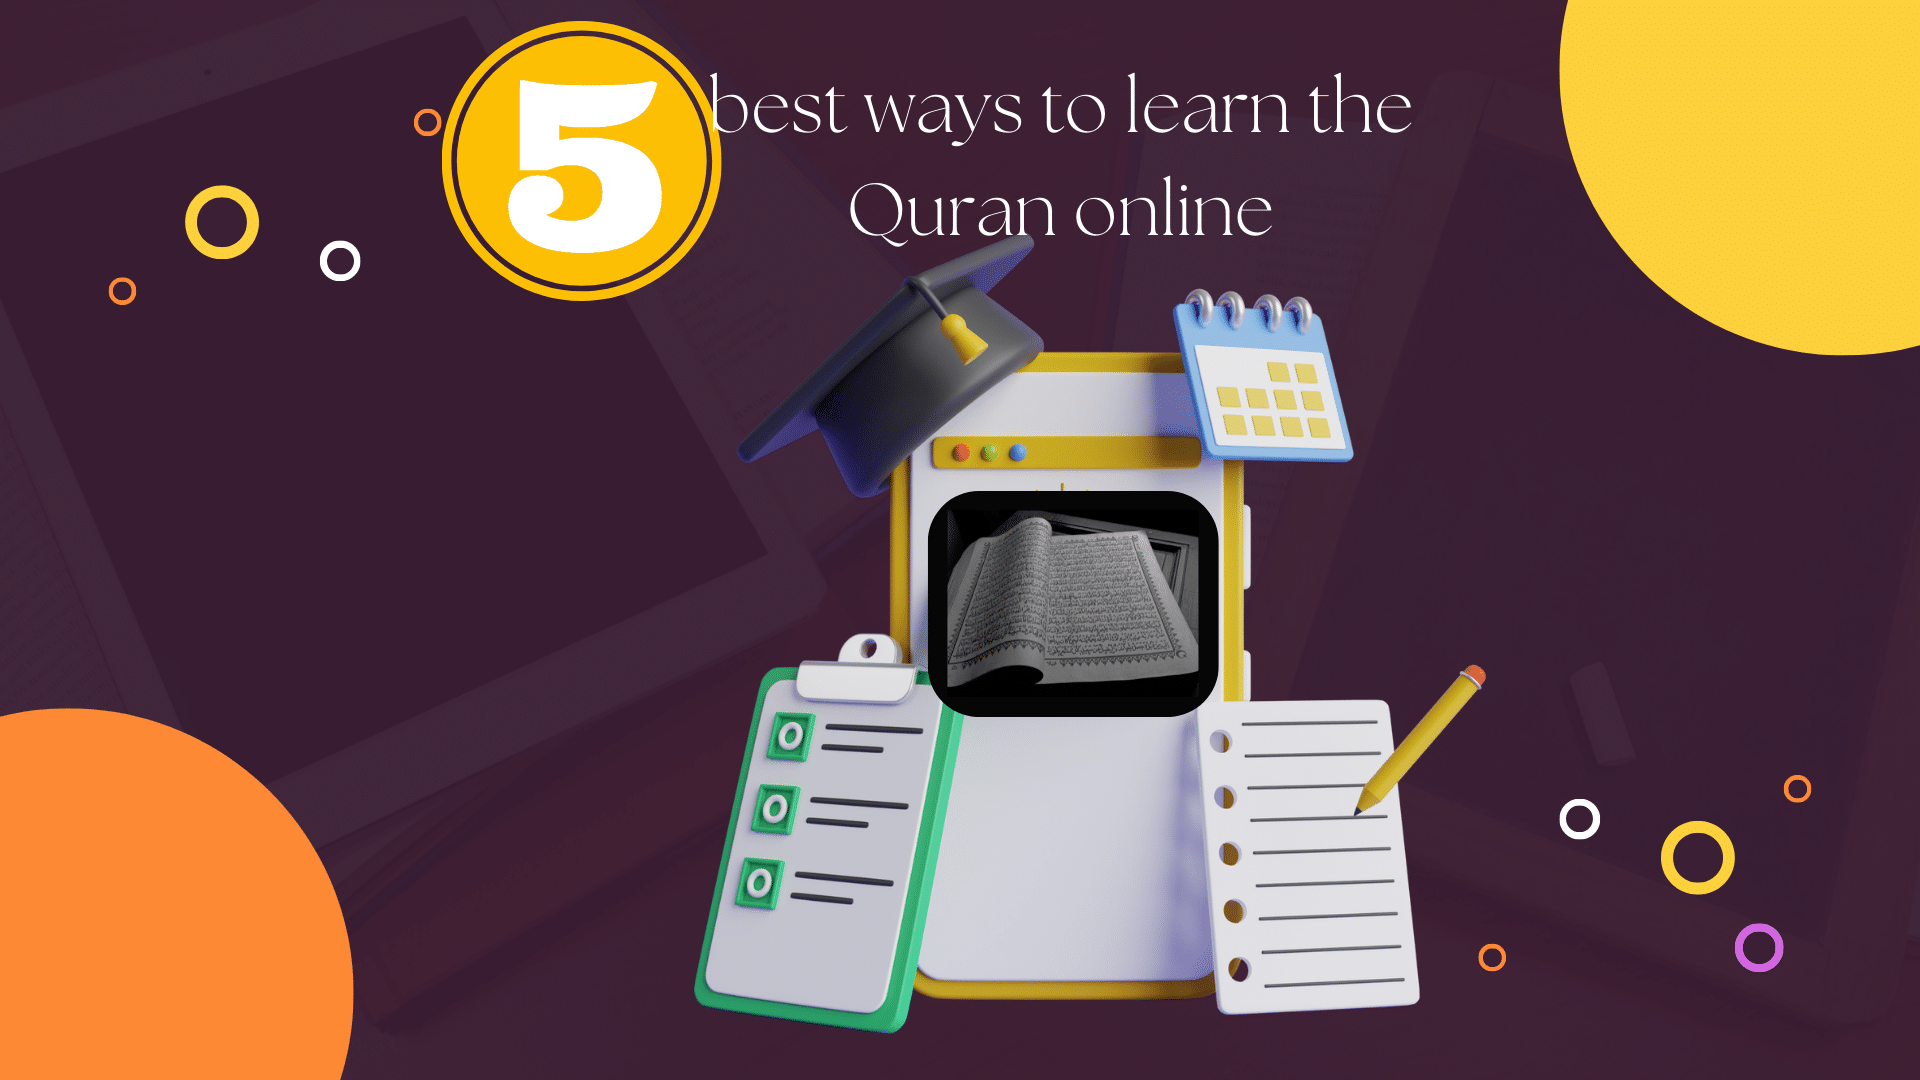 5 BEST WAYS TO LEARN THE QURAN ONLINE